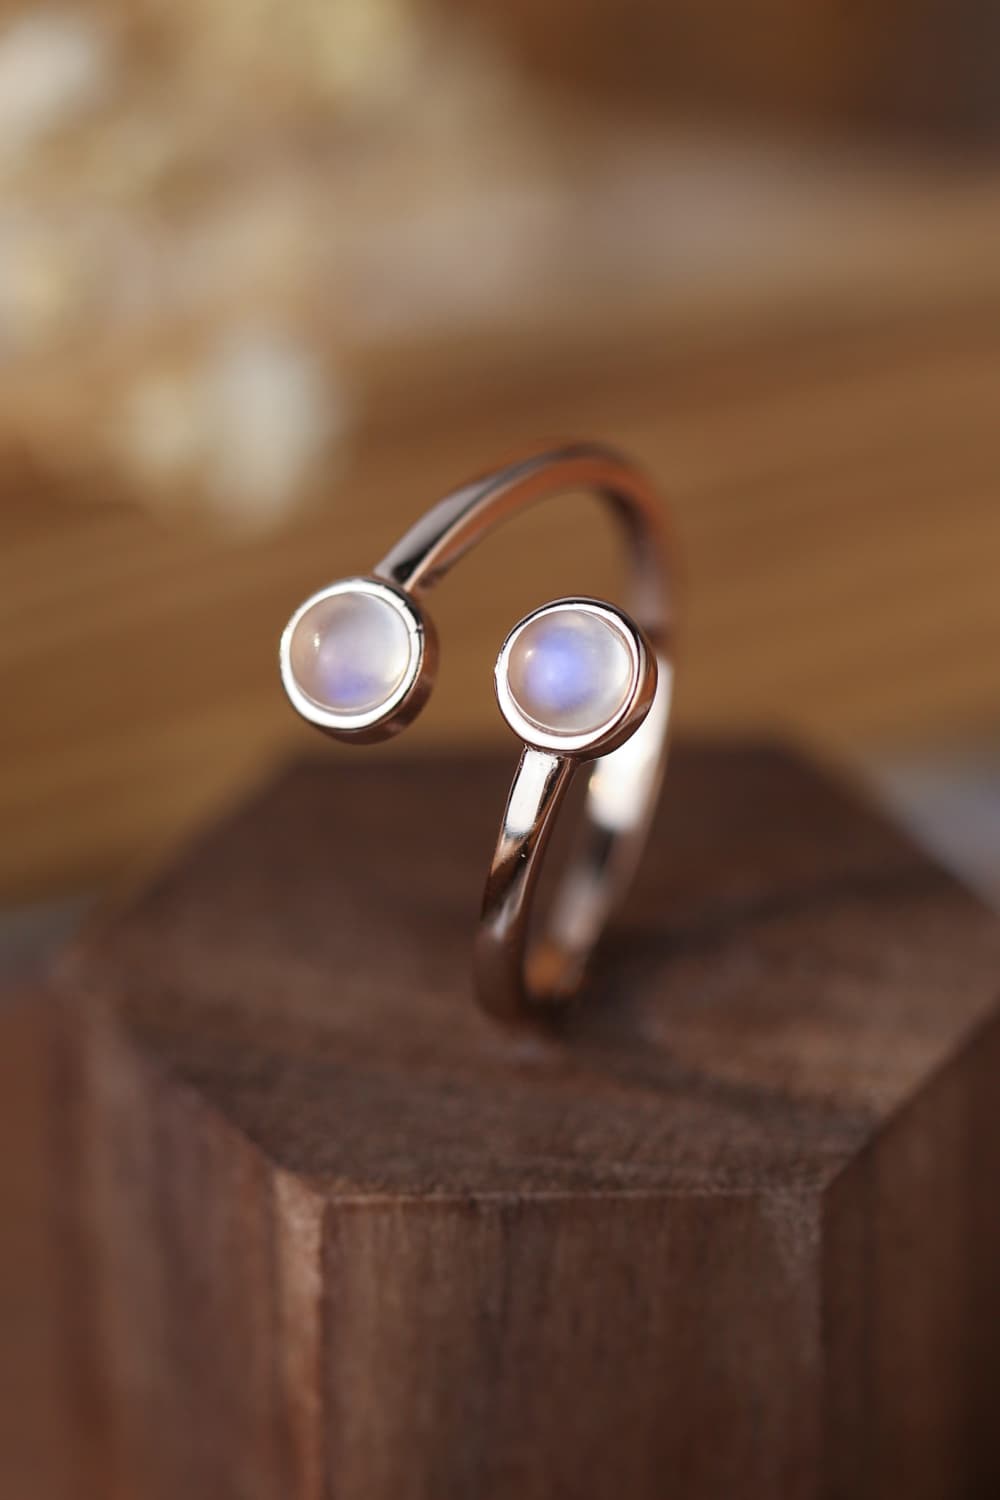 High Quality Natural Moonstone 925 Sterling Silver Toi Et Moi Ring BLUE ZONE PLANET